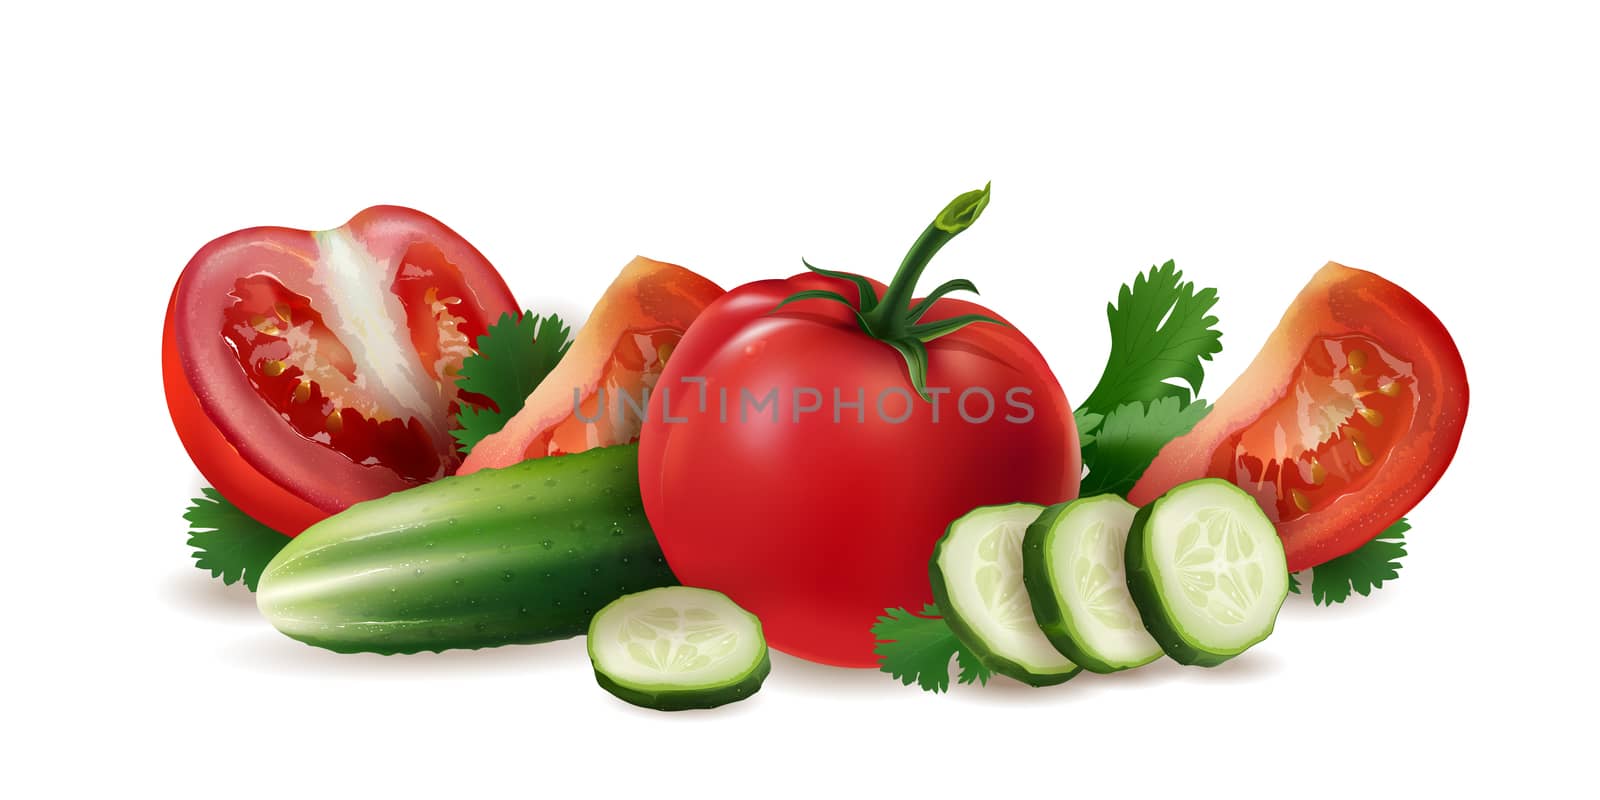 Tomatoes, cucumber and salad by ConceptCafe